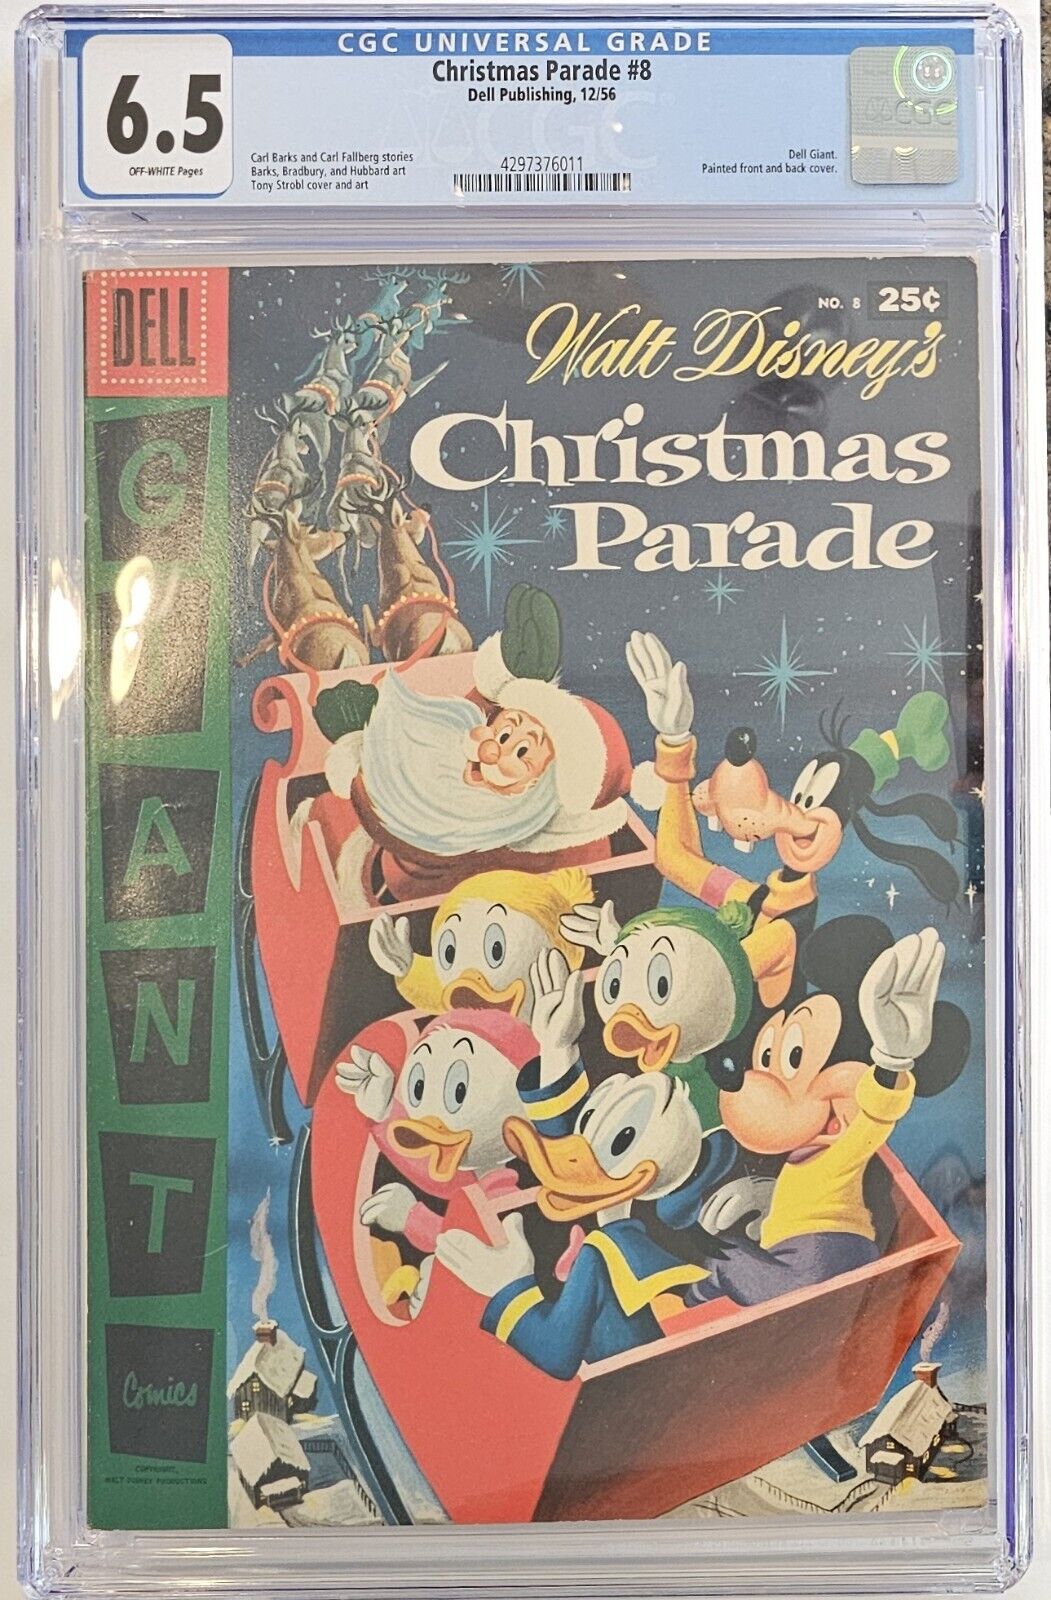 CGC 6.5 OWP Dell Giant Walt Disney's Christmas Parade #8 1956 Rare To See Graded